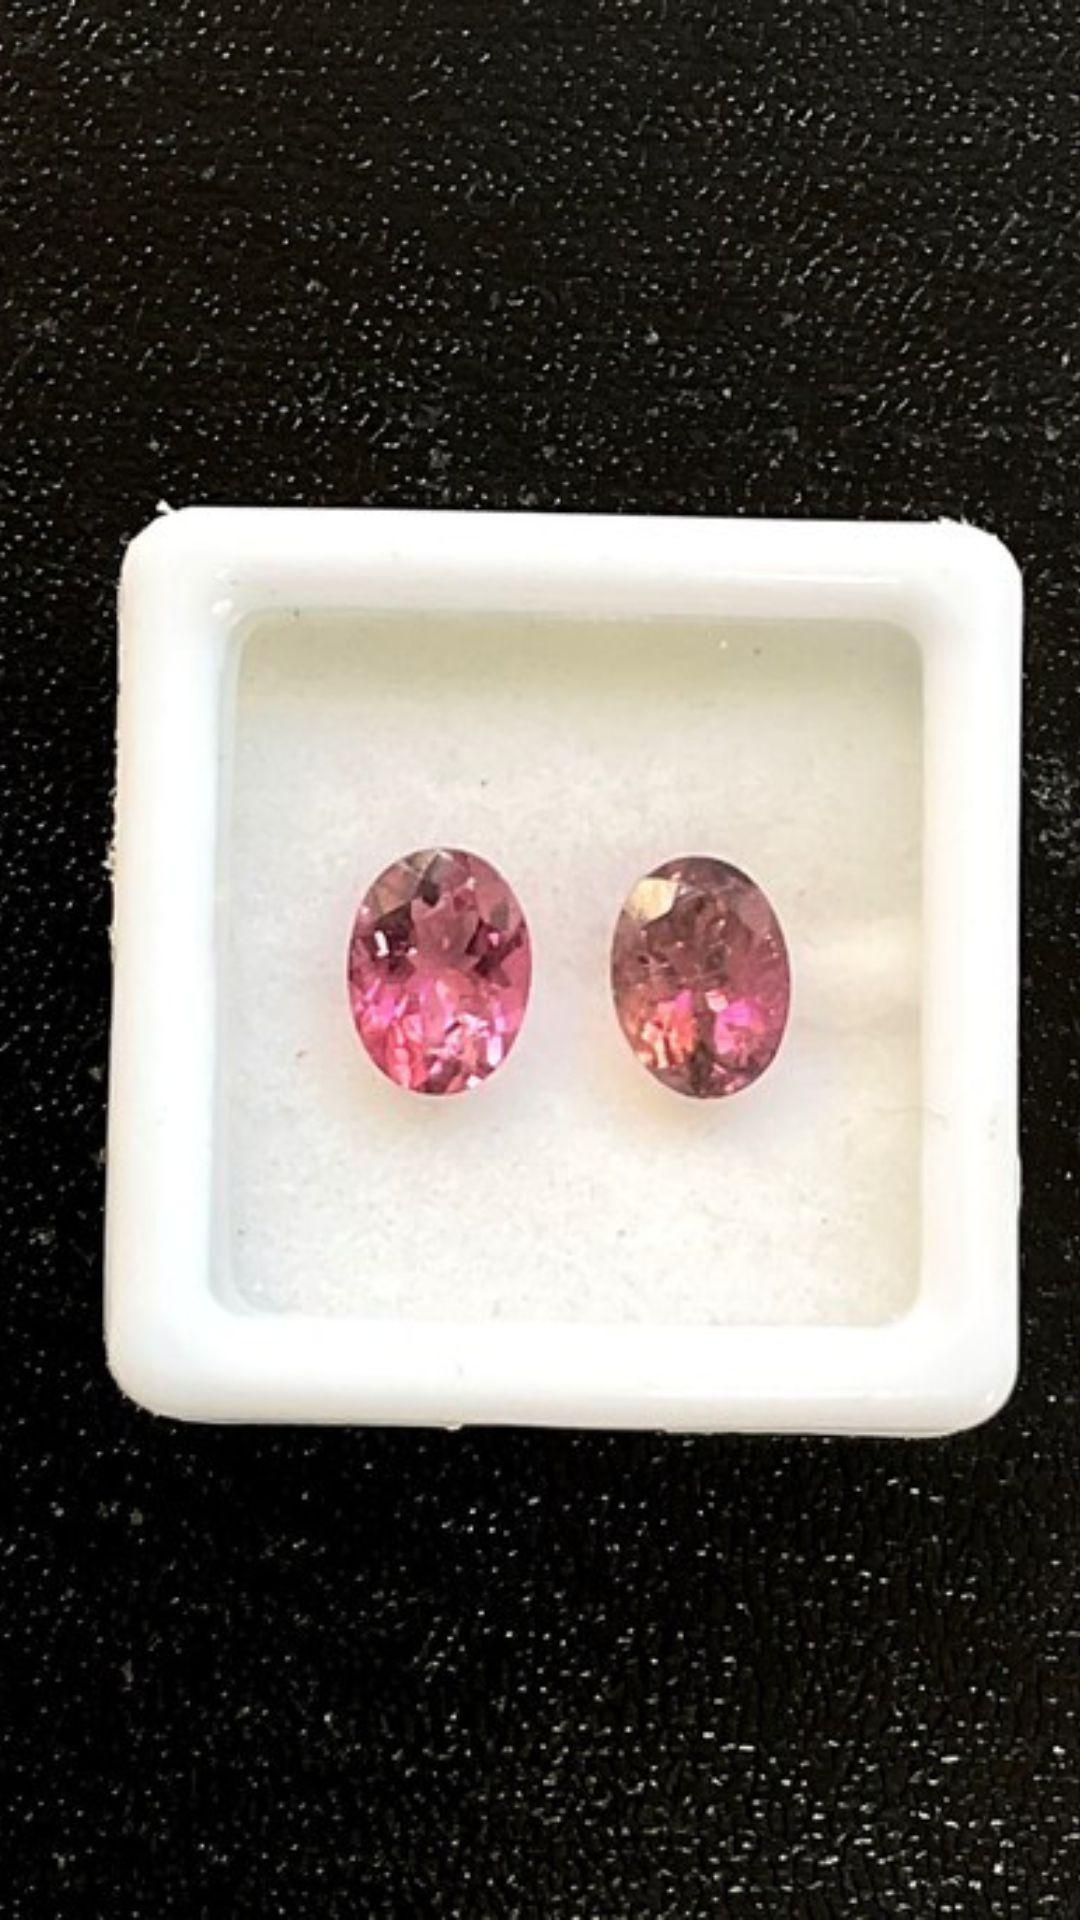 2.70 carats multi tourmaline , top quality tourmaline jewelry cut , natural tourmaline gemstone 2 pieces for jewelry

Gemstone - Tourmaline
Weight- 2.70 Carats
Shape - Oval
Size - 8x6 MM
Pieces - 2
Drill- Not Drilled


Prismatic Gems (: